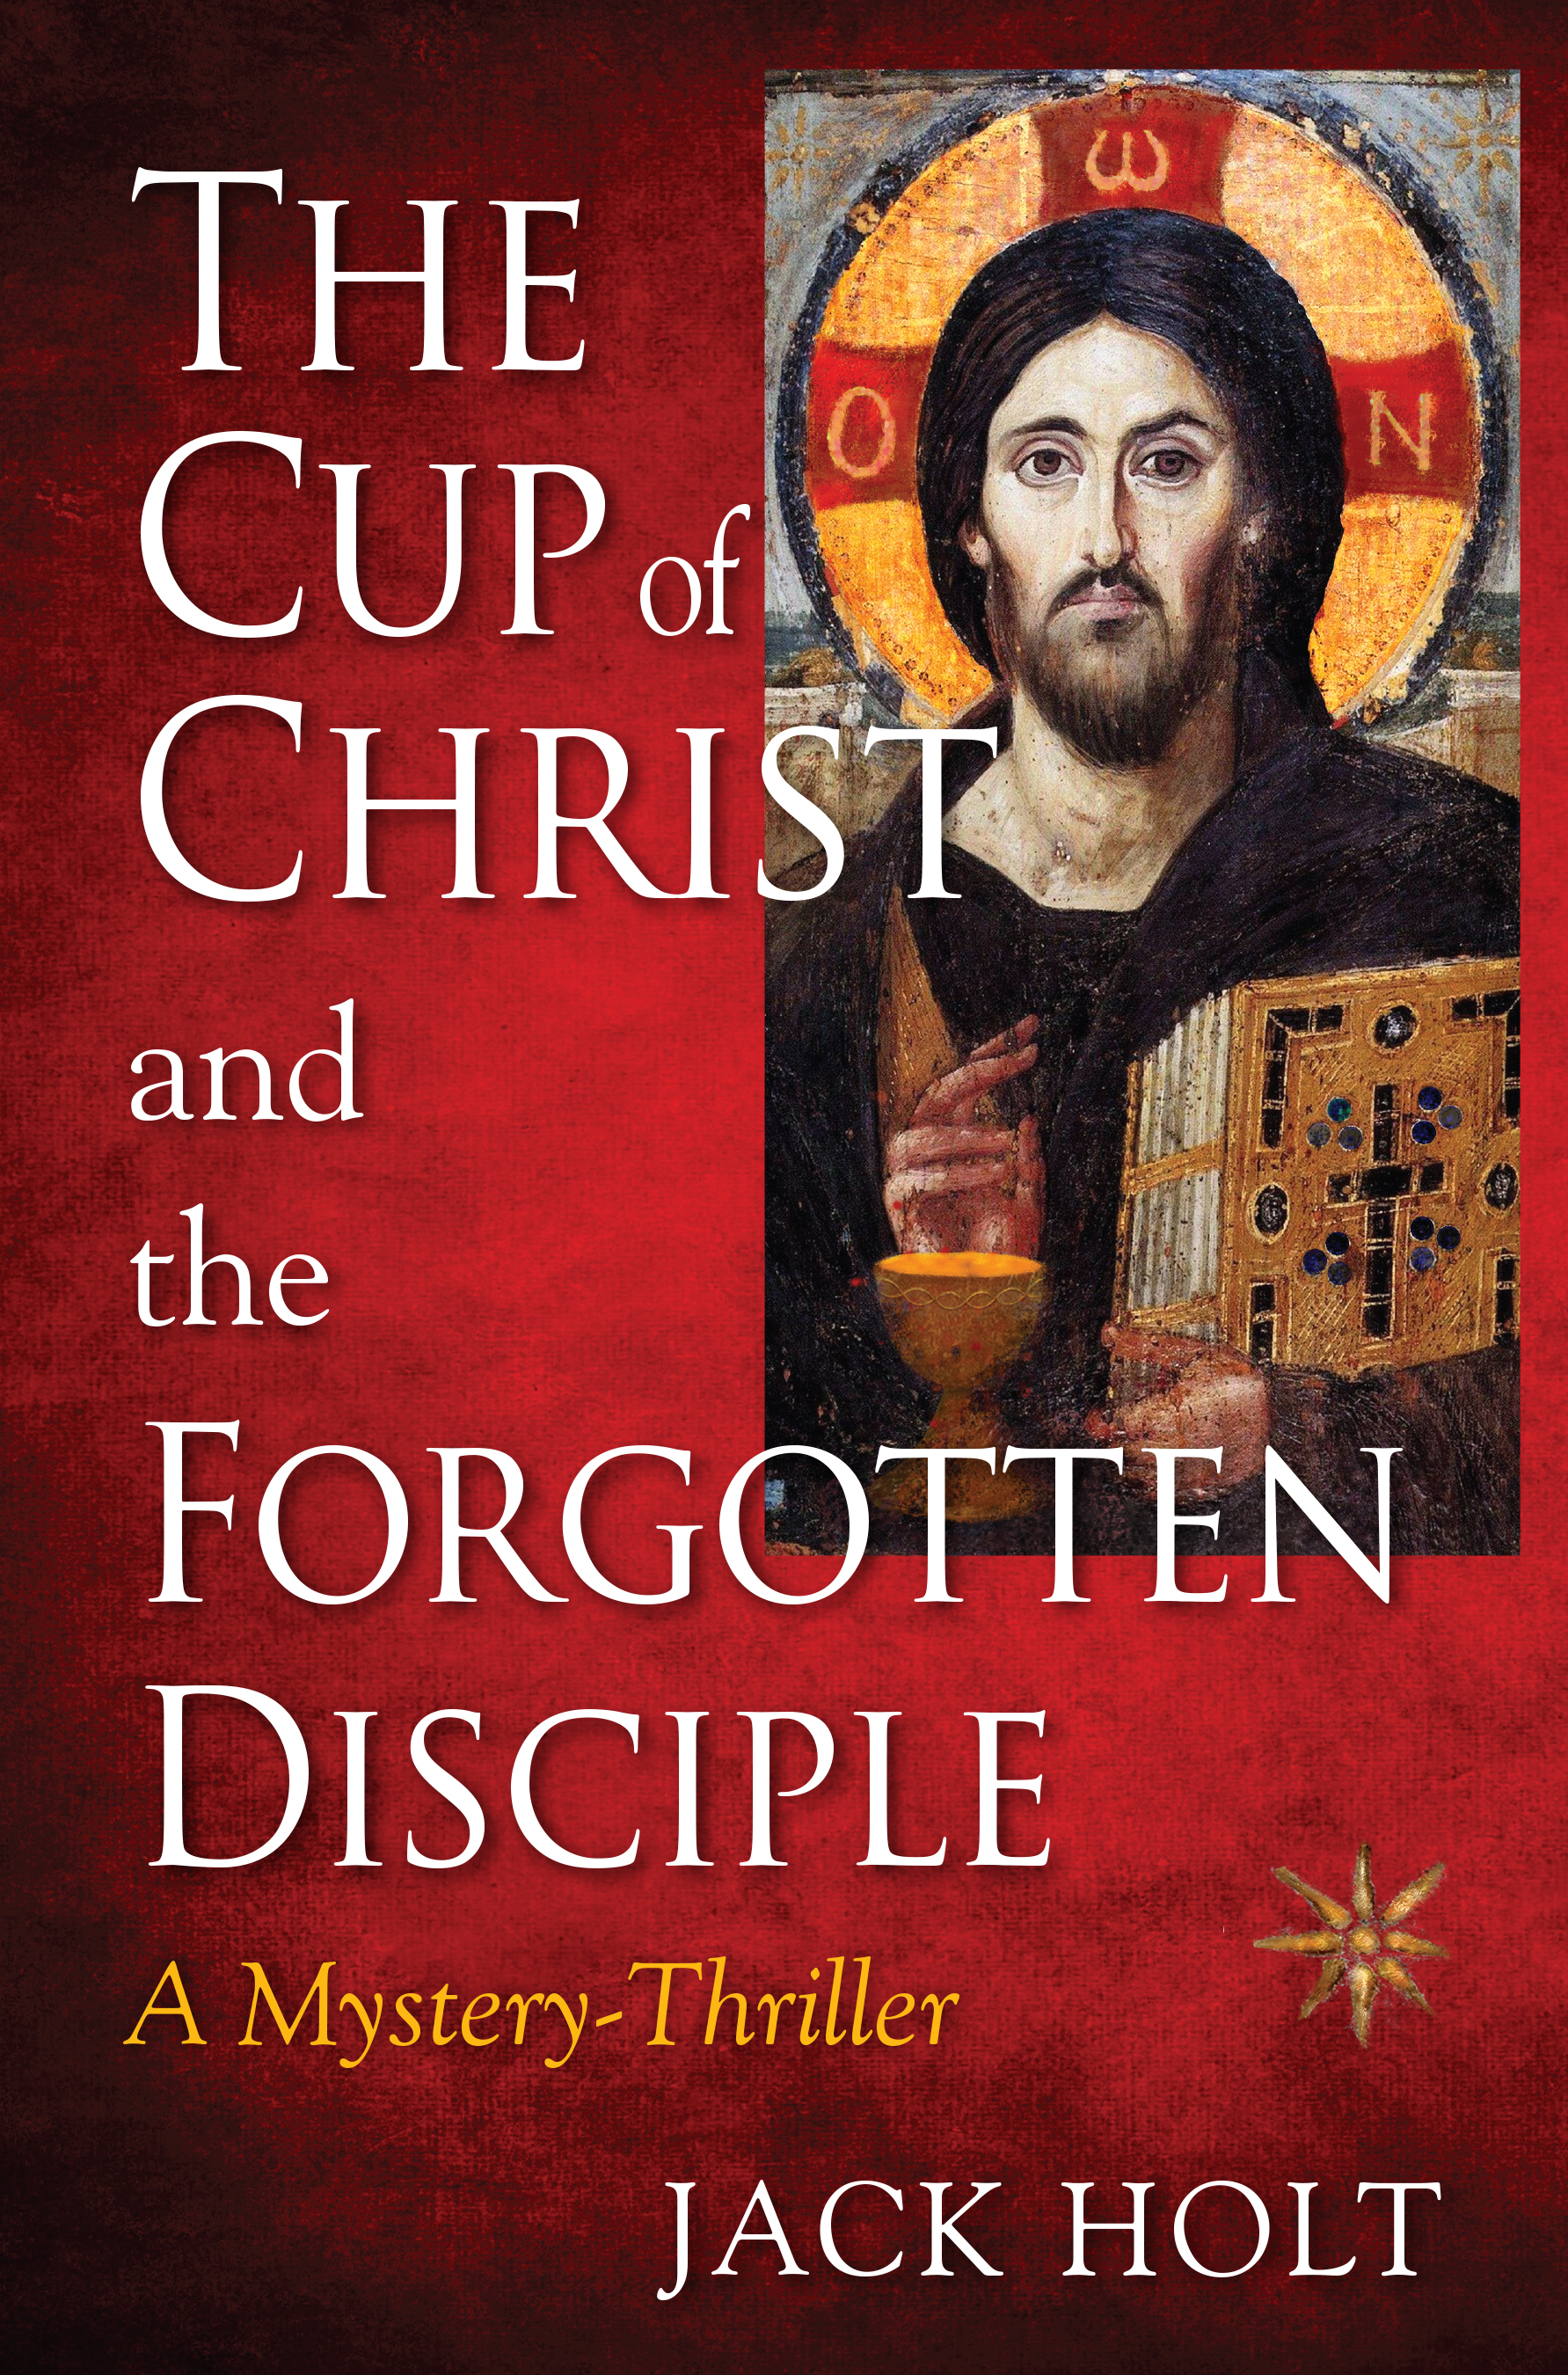 Cup of Christ dust jacket 6-26-18